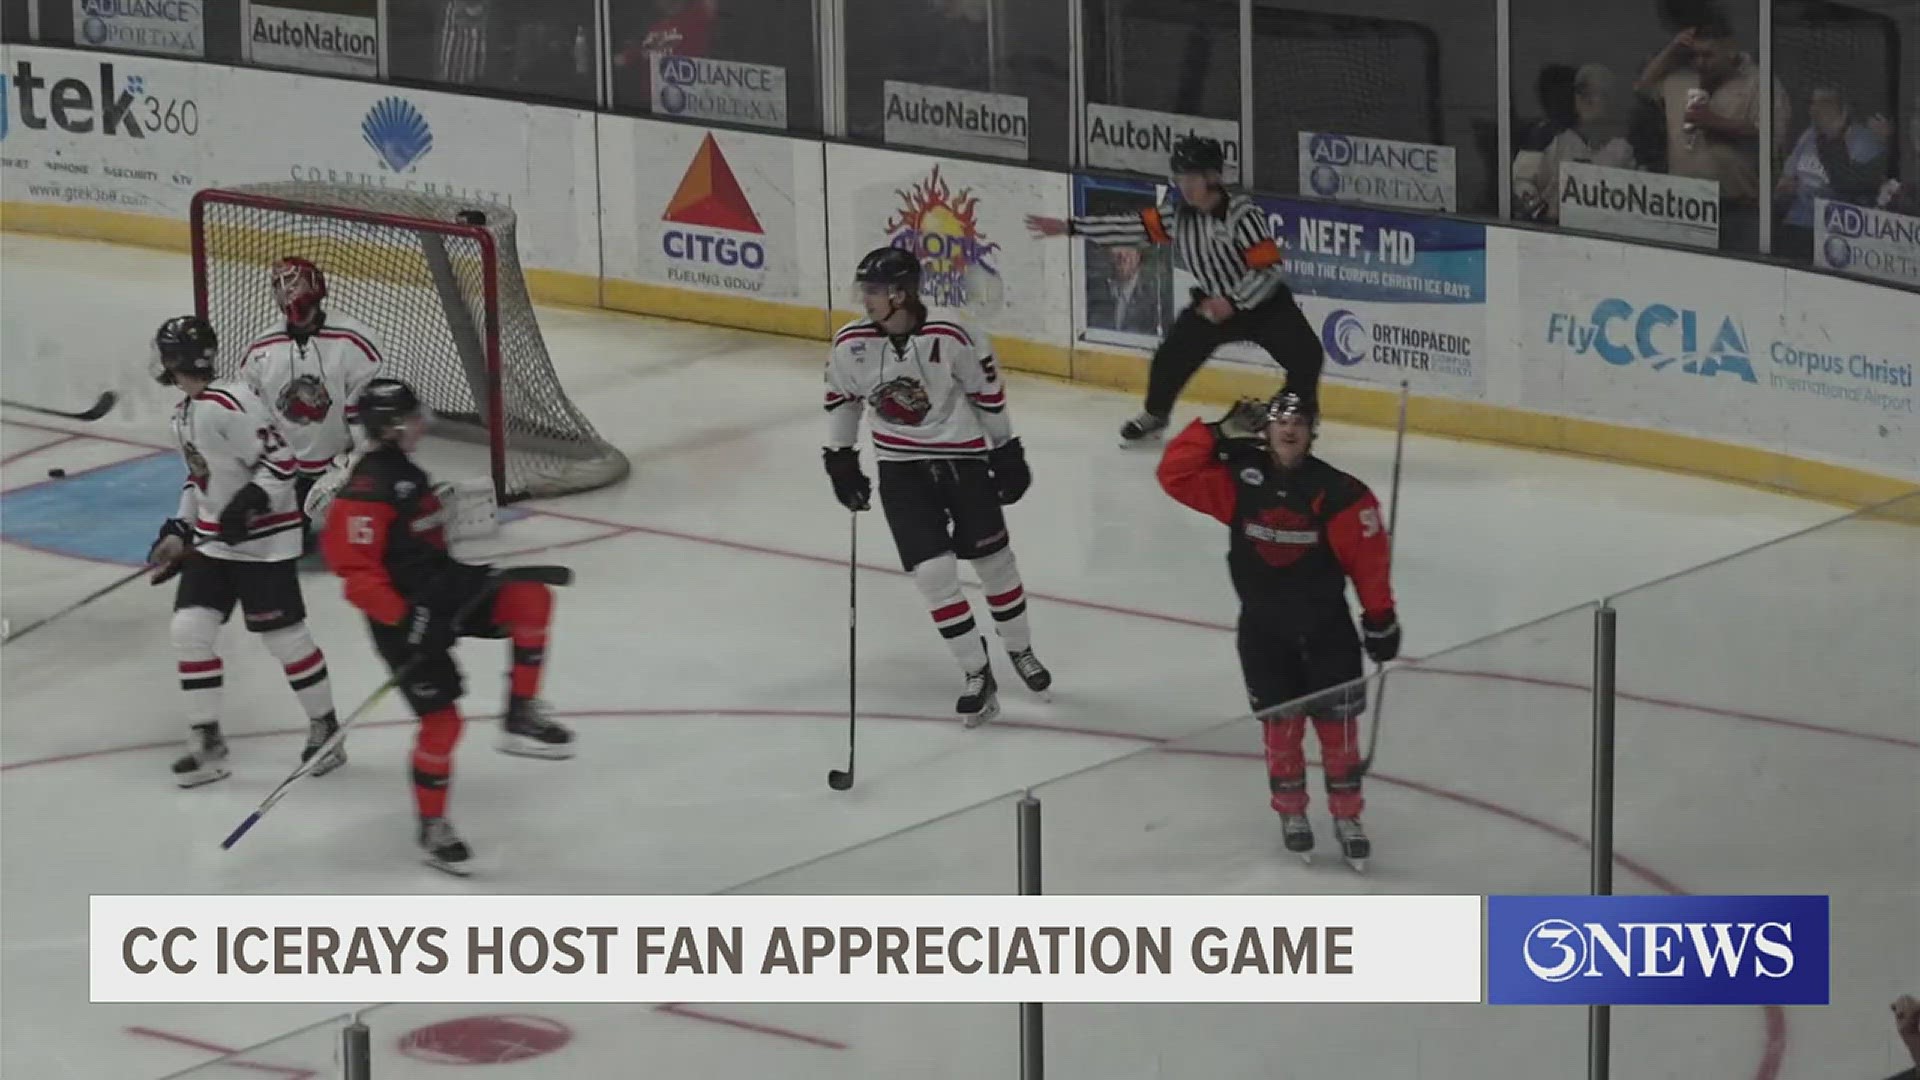 IceRays Head Coach Sylvain Cloutier explained that fans give the team a boost at home.